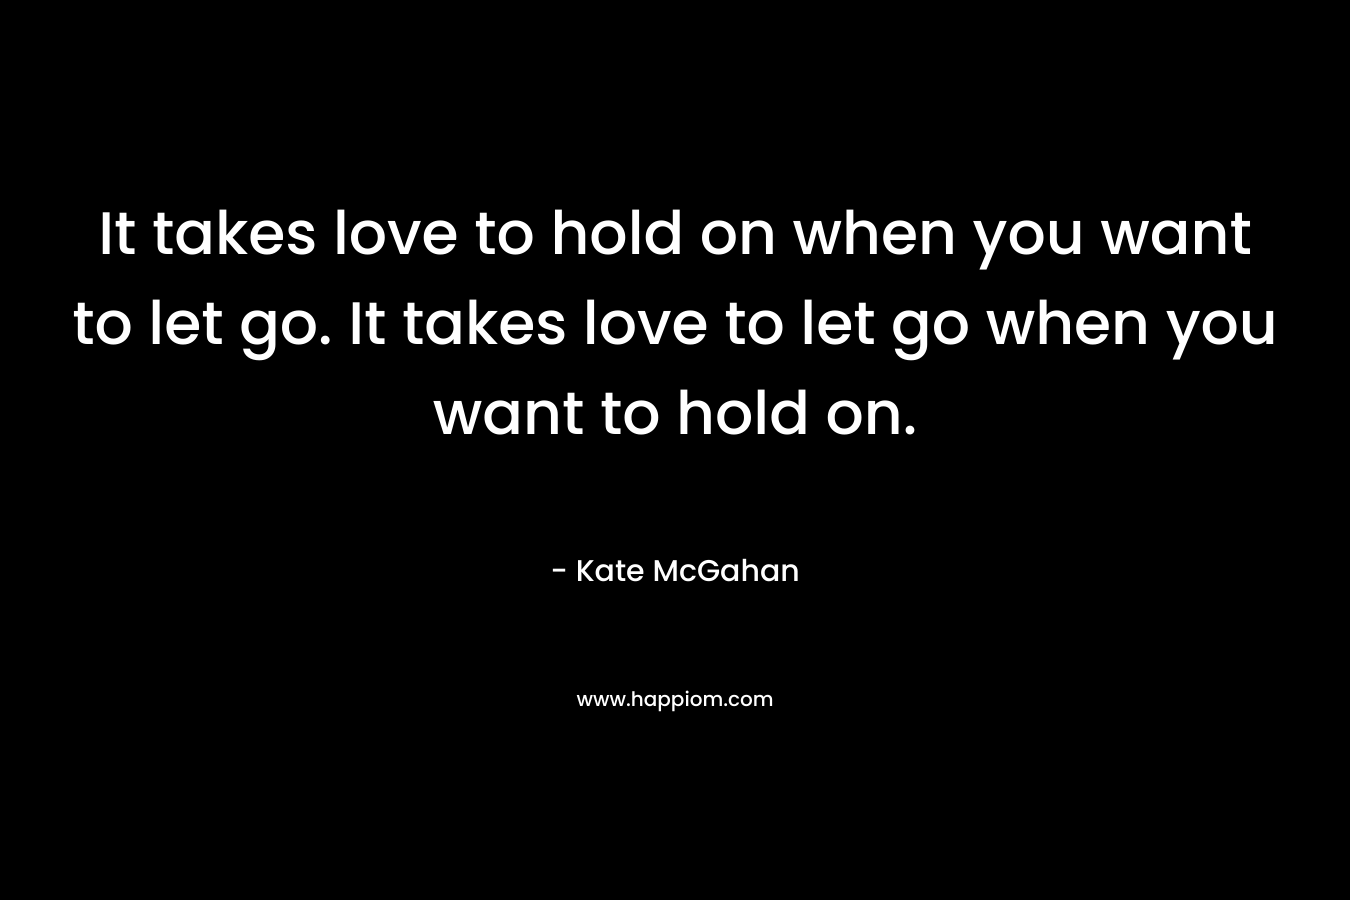 It takes love to hold on when you want to let go. It takes love to let go when you want to hold on.